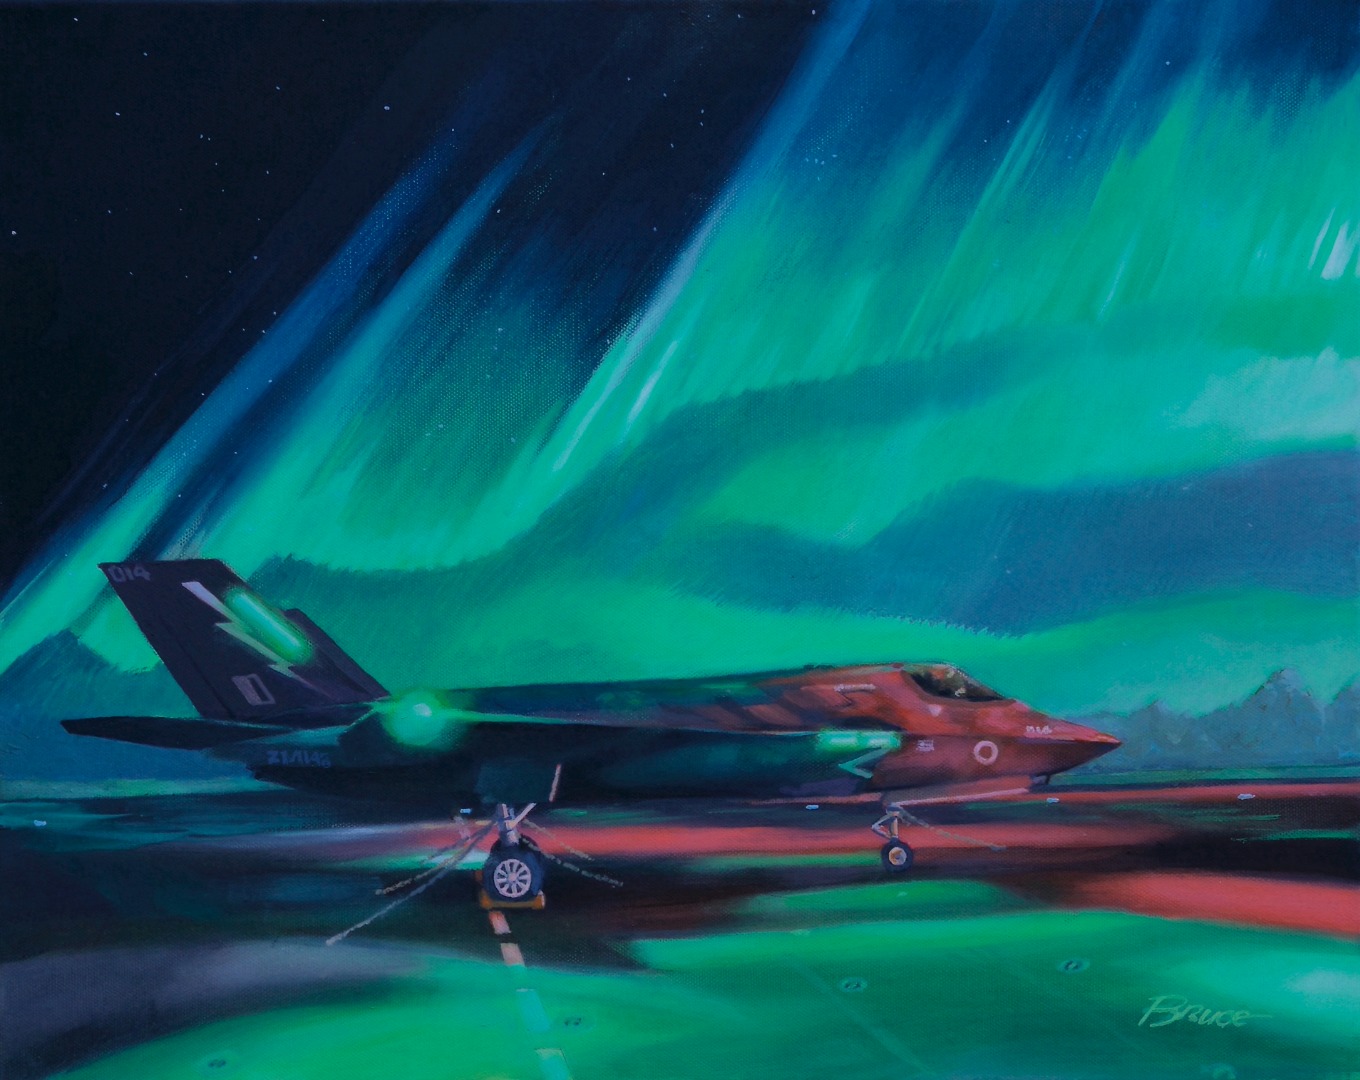 Star of the Northern Lights. 617 Squadron RAF Dambusters F35b with HMS Queen Elizabeth's deck night lights